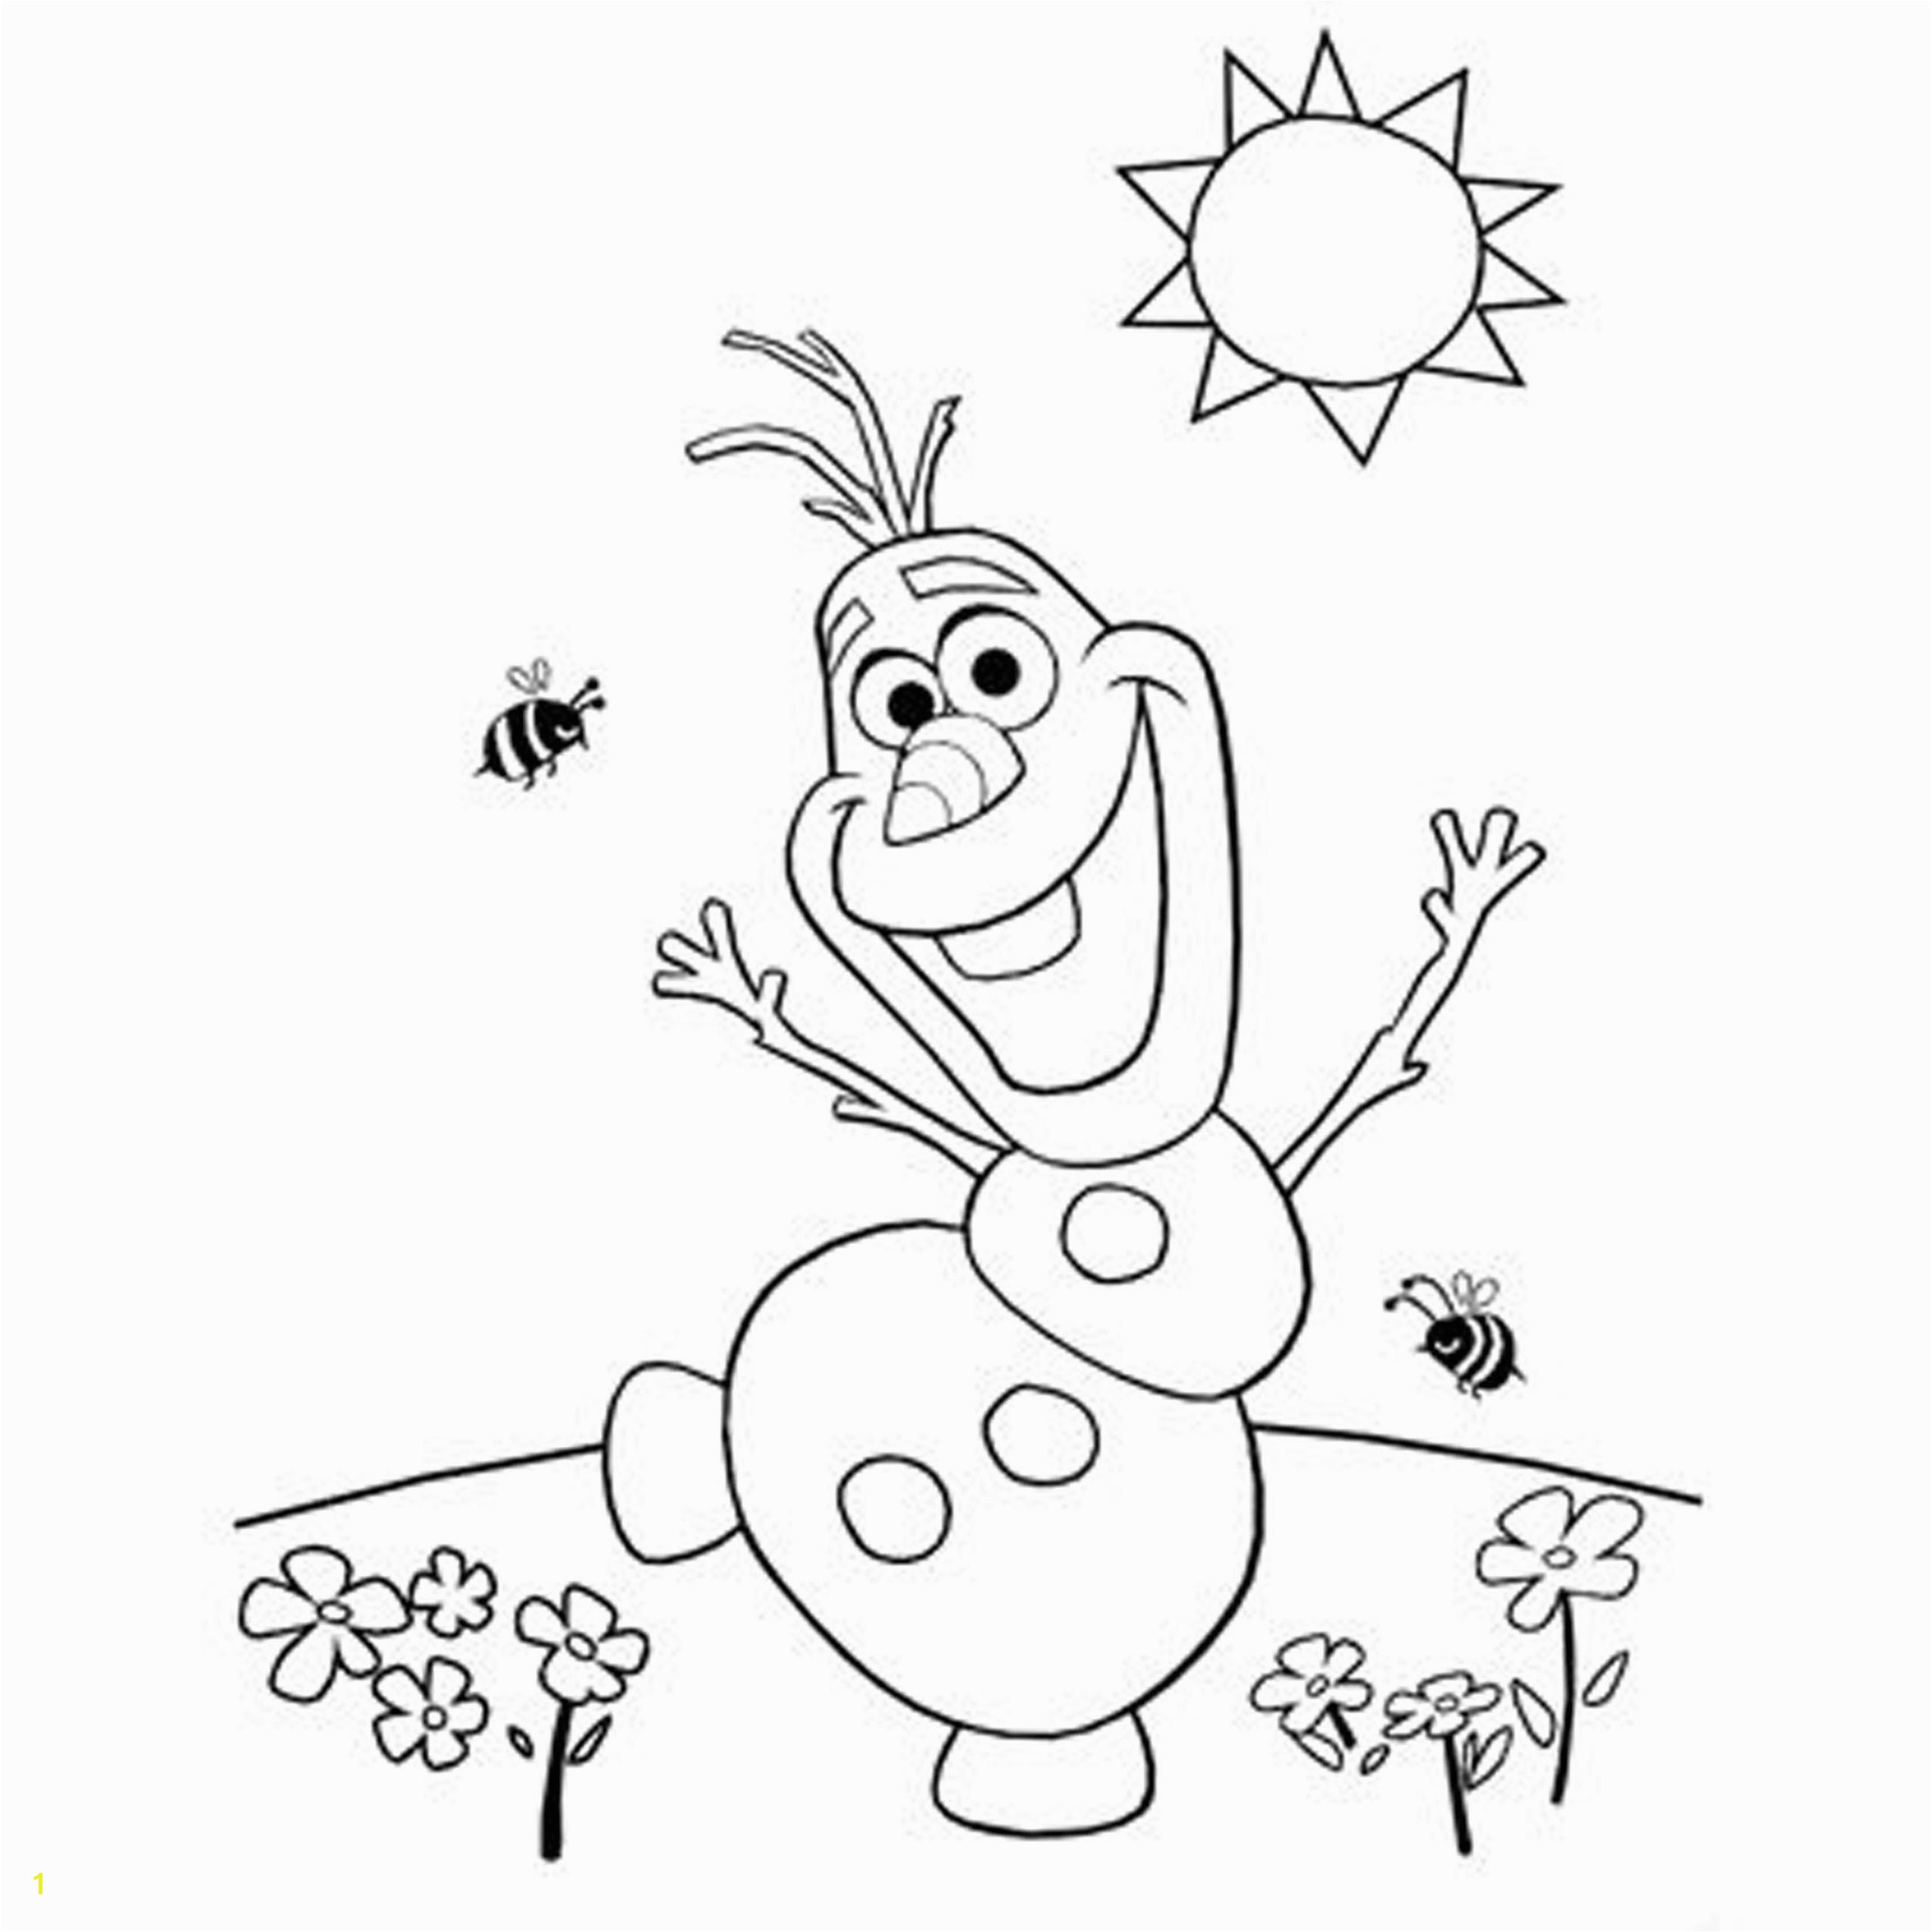 Frozen Free Coloring Pages to Print Print Out Pages Refrence Free Printable Frozen Coloring Pages for